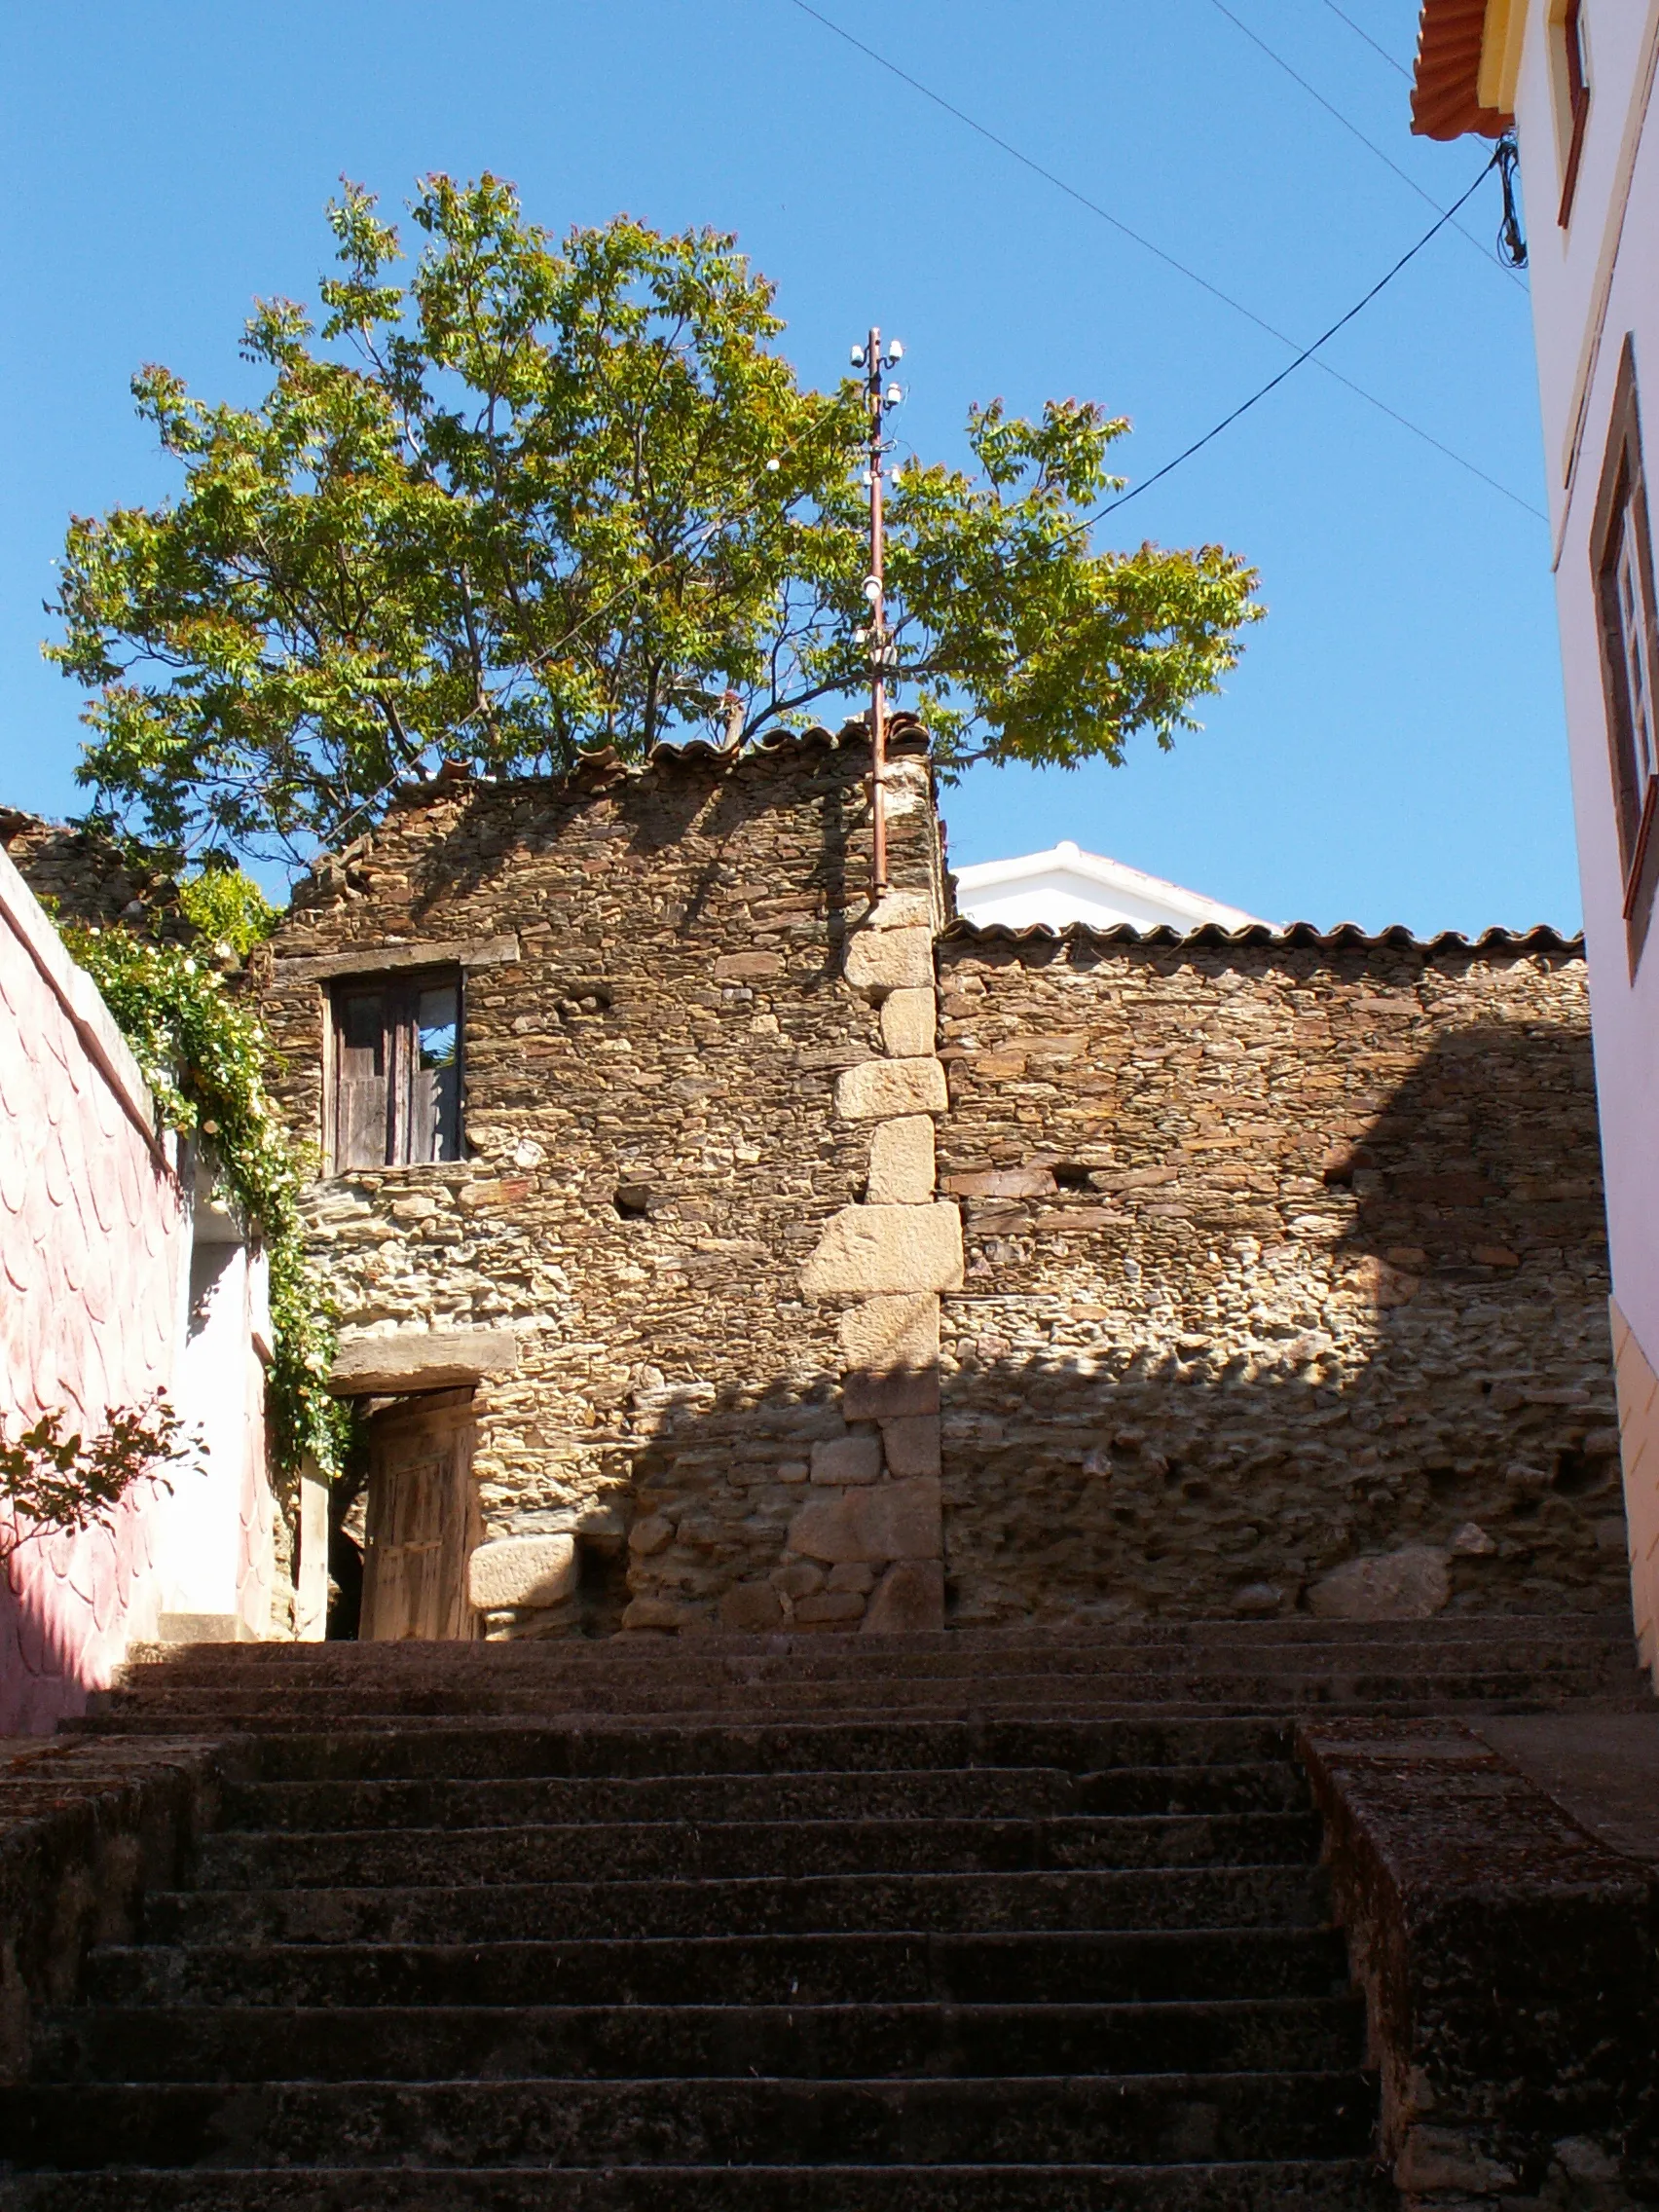 Photo showing: Old streets of an old village